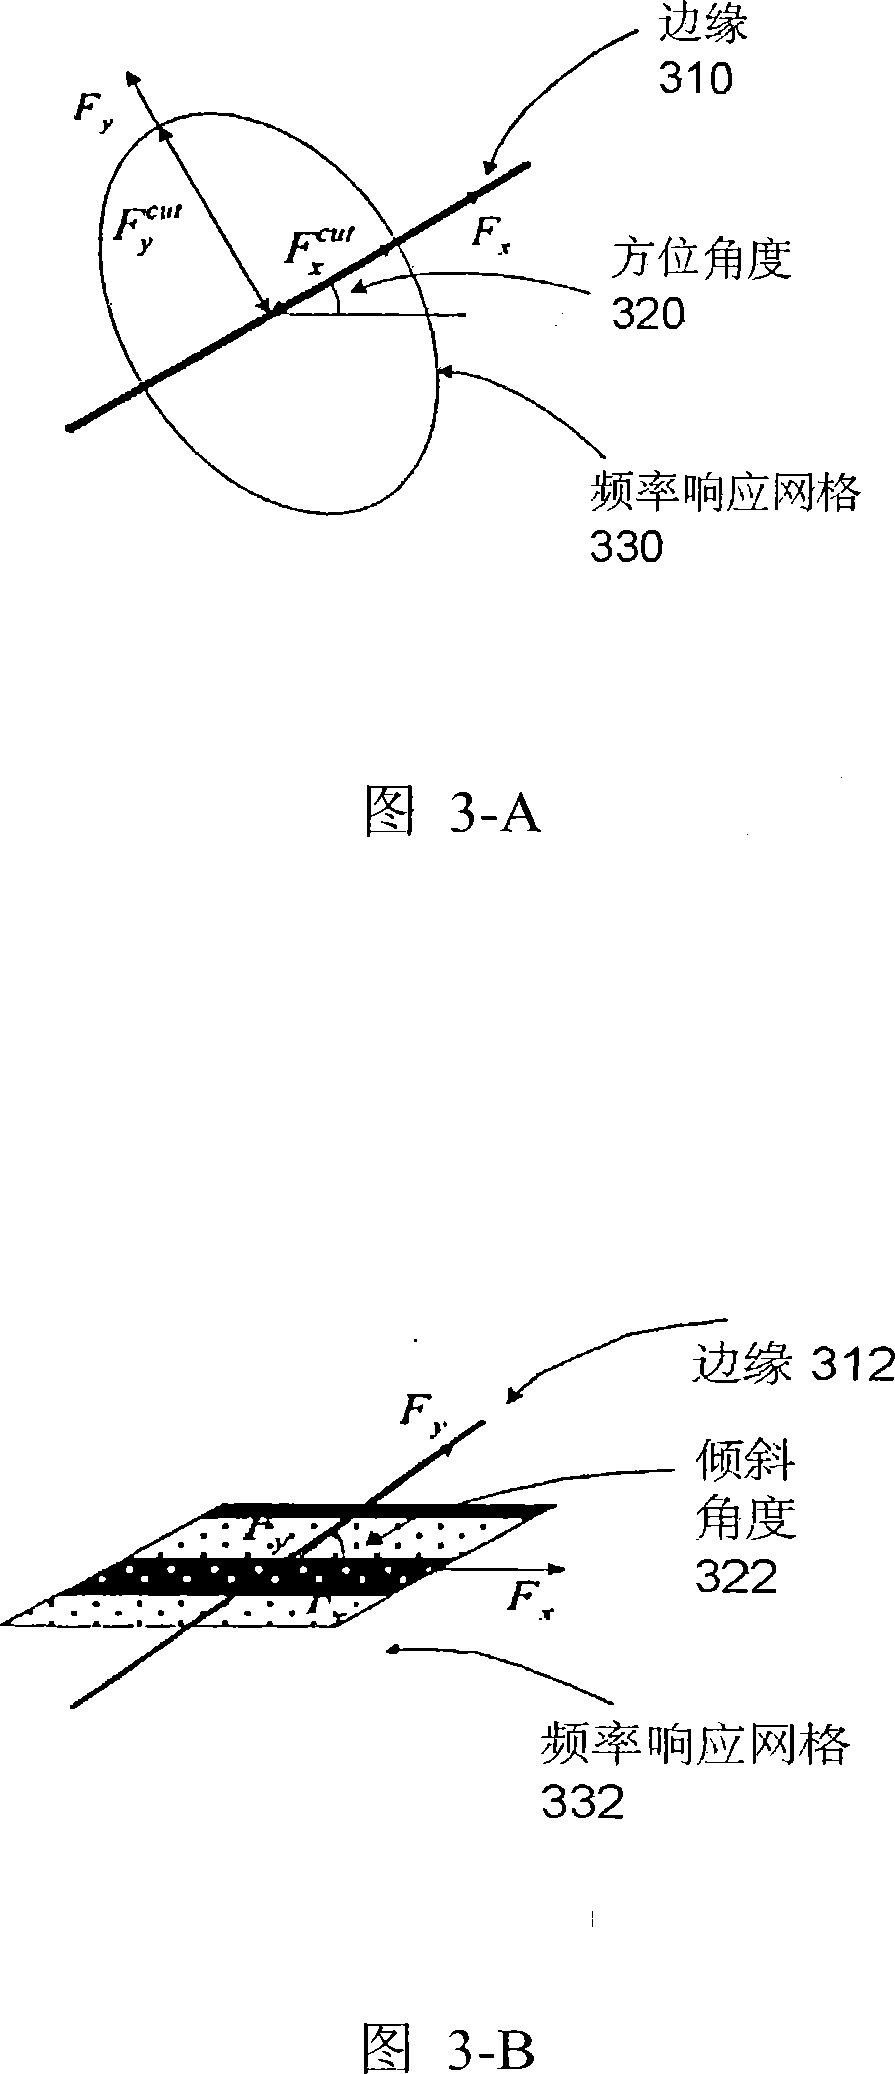 Edge adaptive image expansion and enhancement system and method